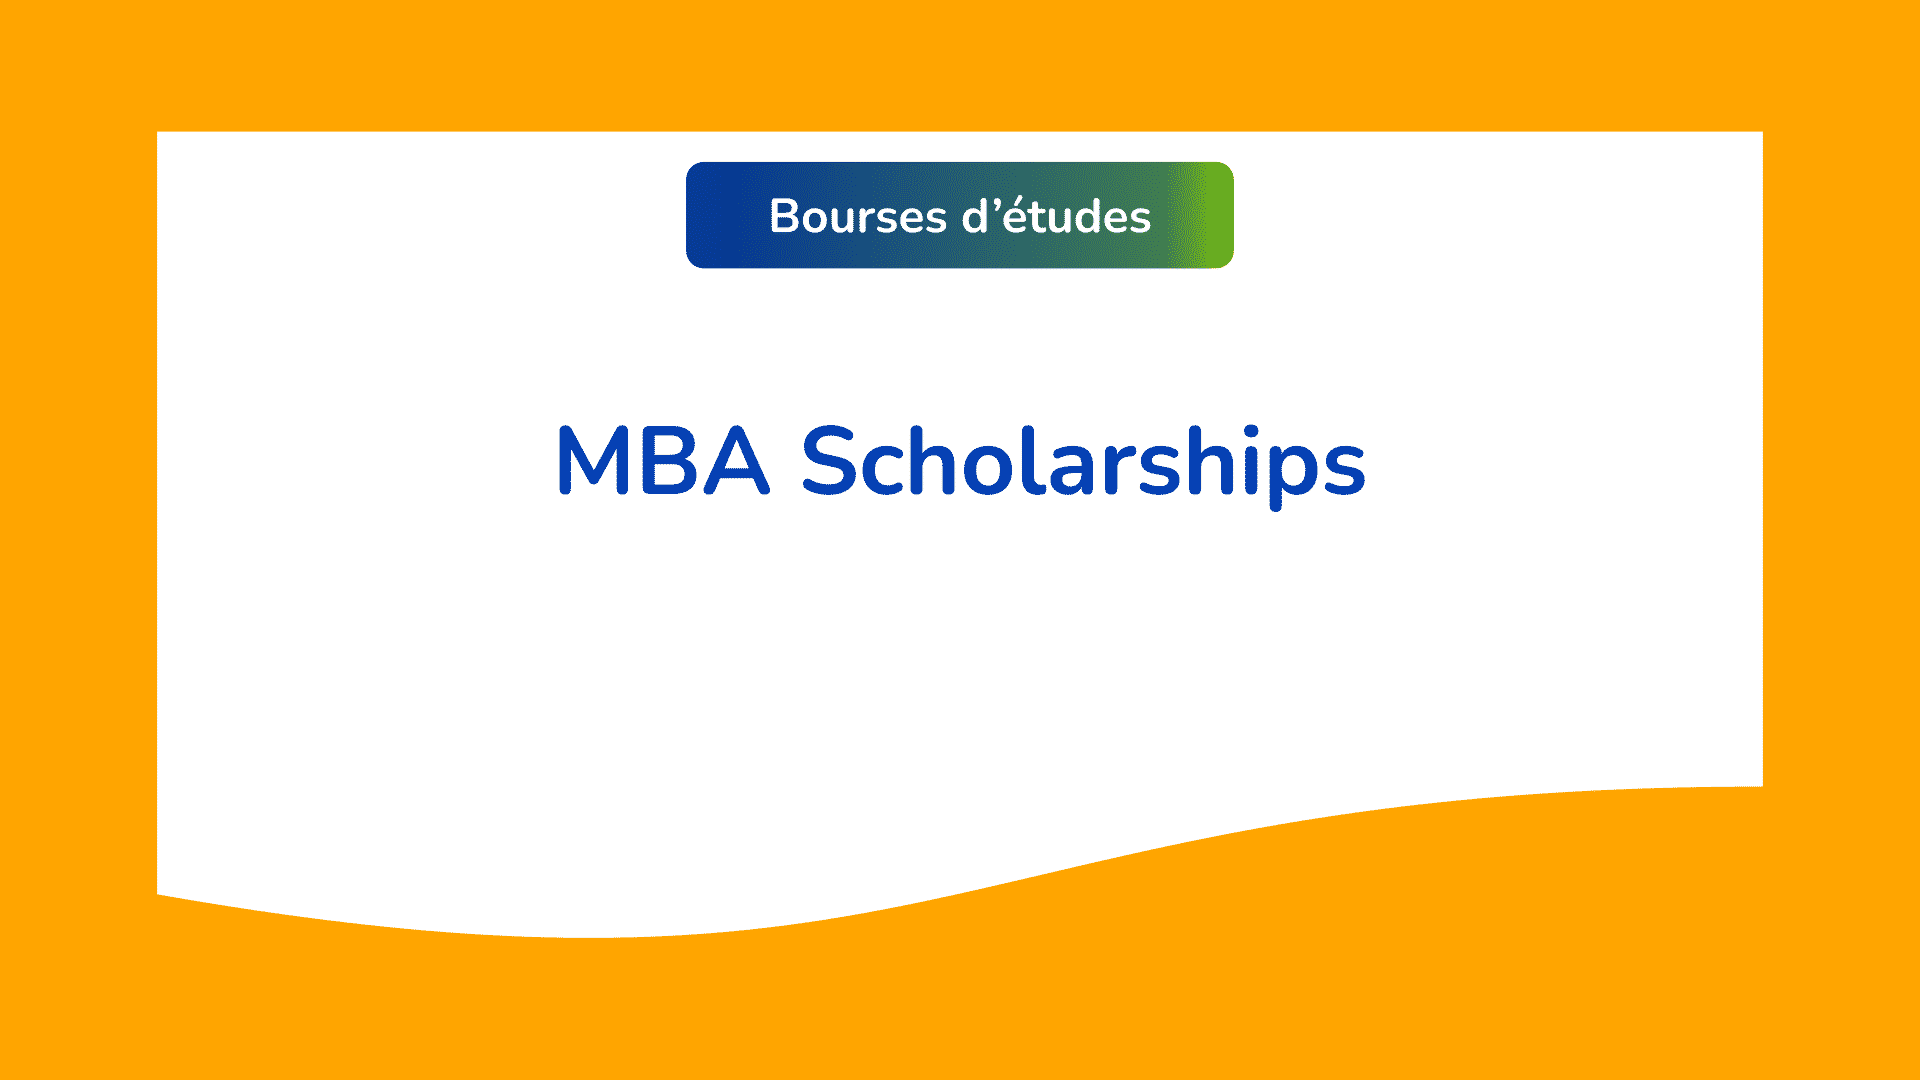 24 MBA Scholarships available in 2023-2024